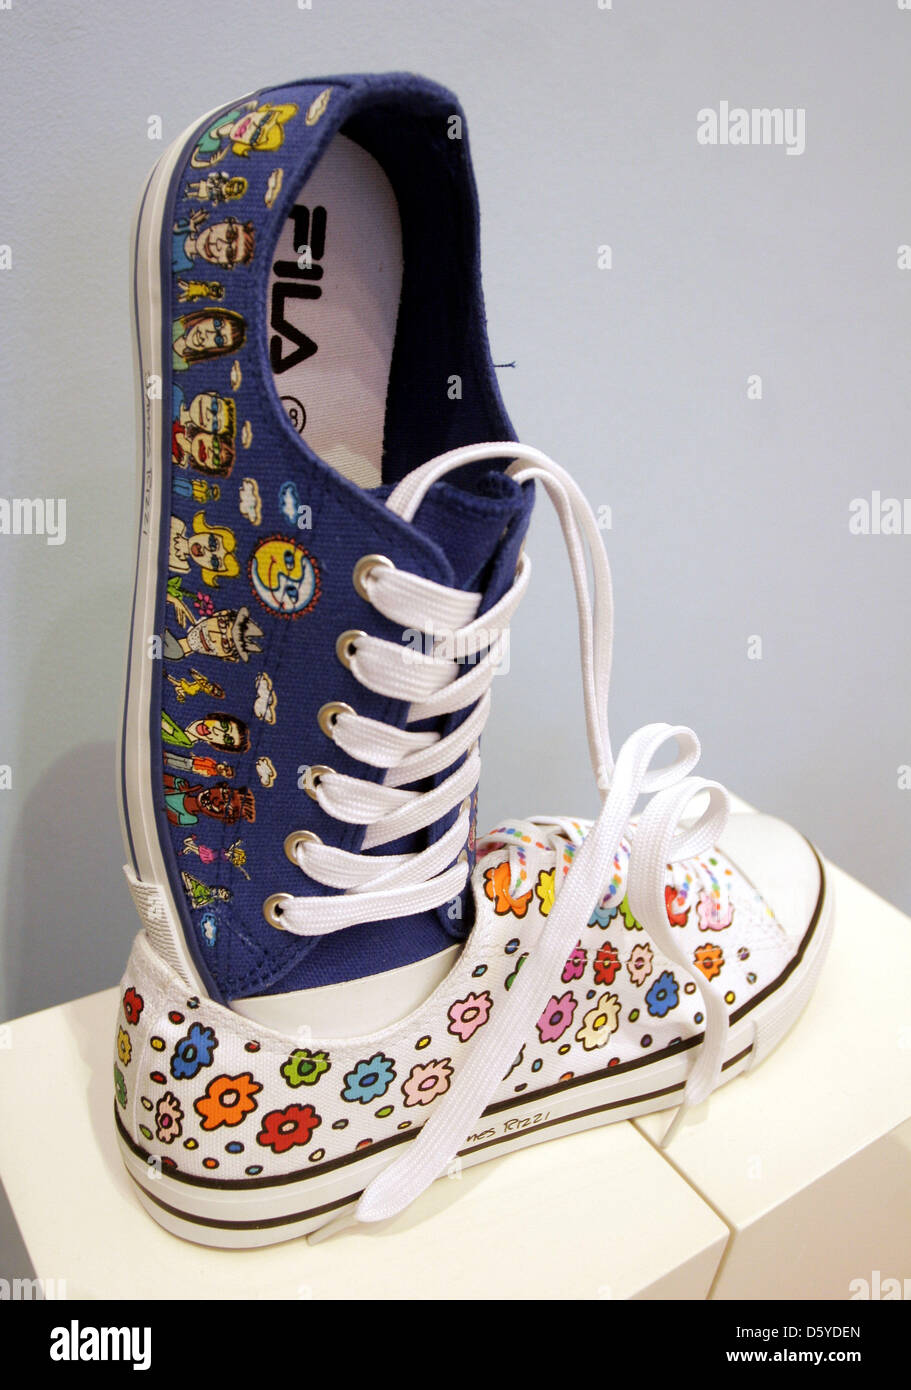 Alle rent Bølle Shoes designed by US American James Rizzi for sports equipment manufacturer  Fila are on display at the art gallery Richter in Berlin, Germany, 29 March  2012. The comprehensive retrospective of the pop-art